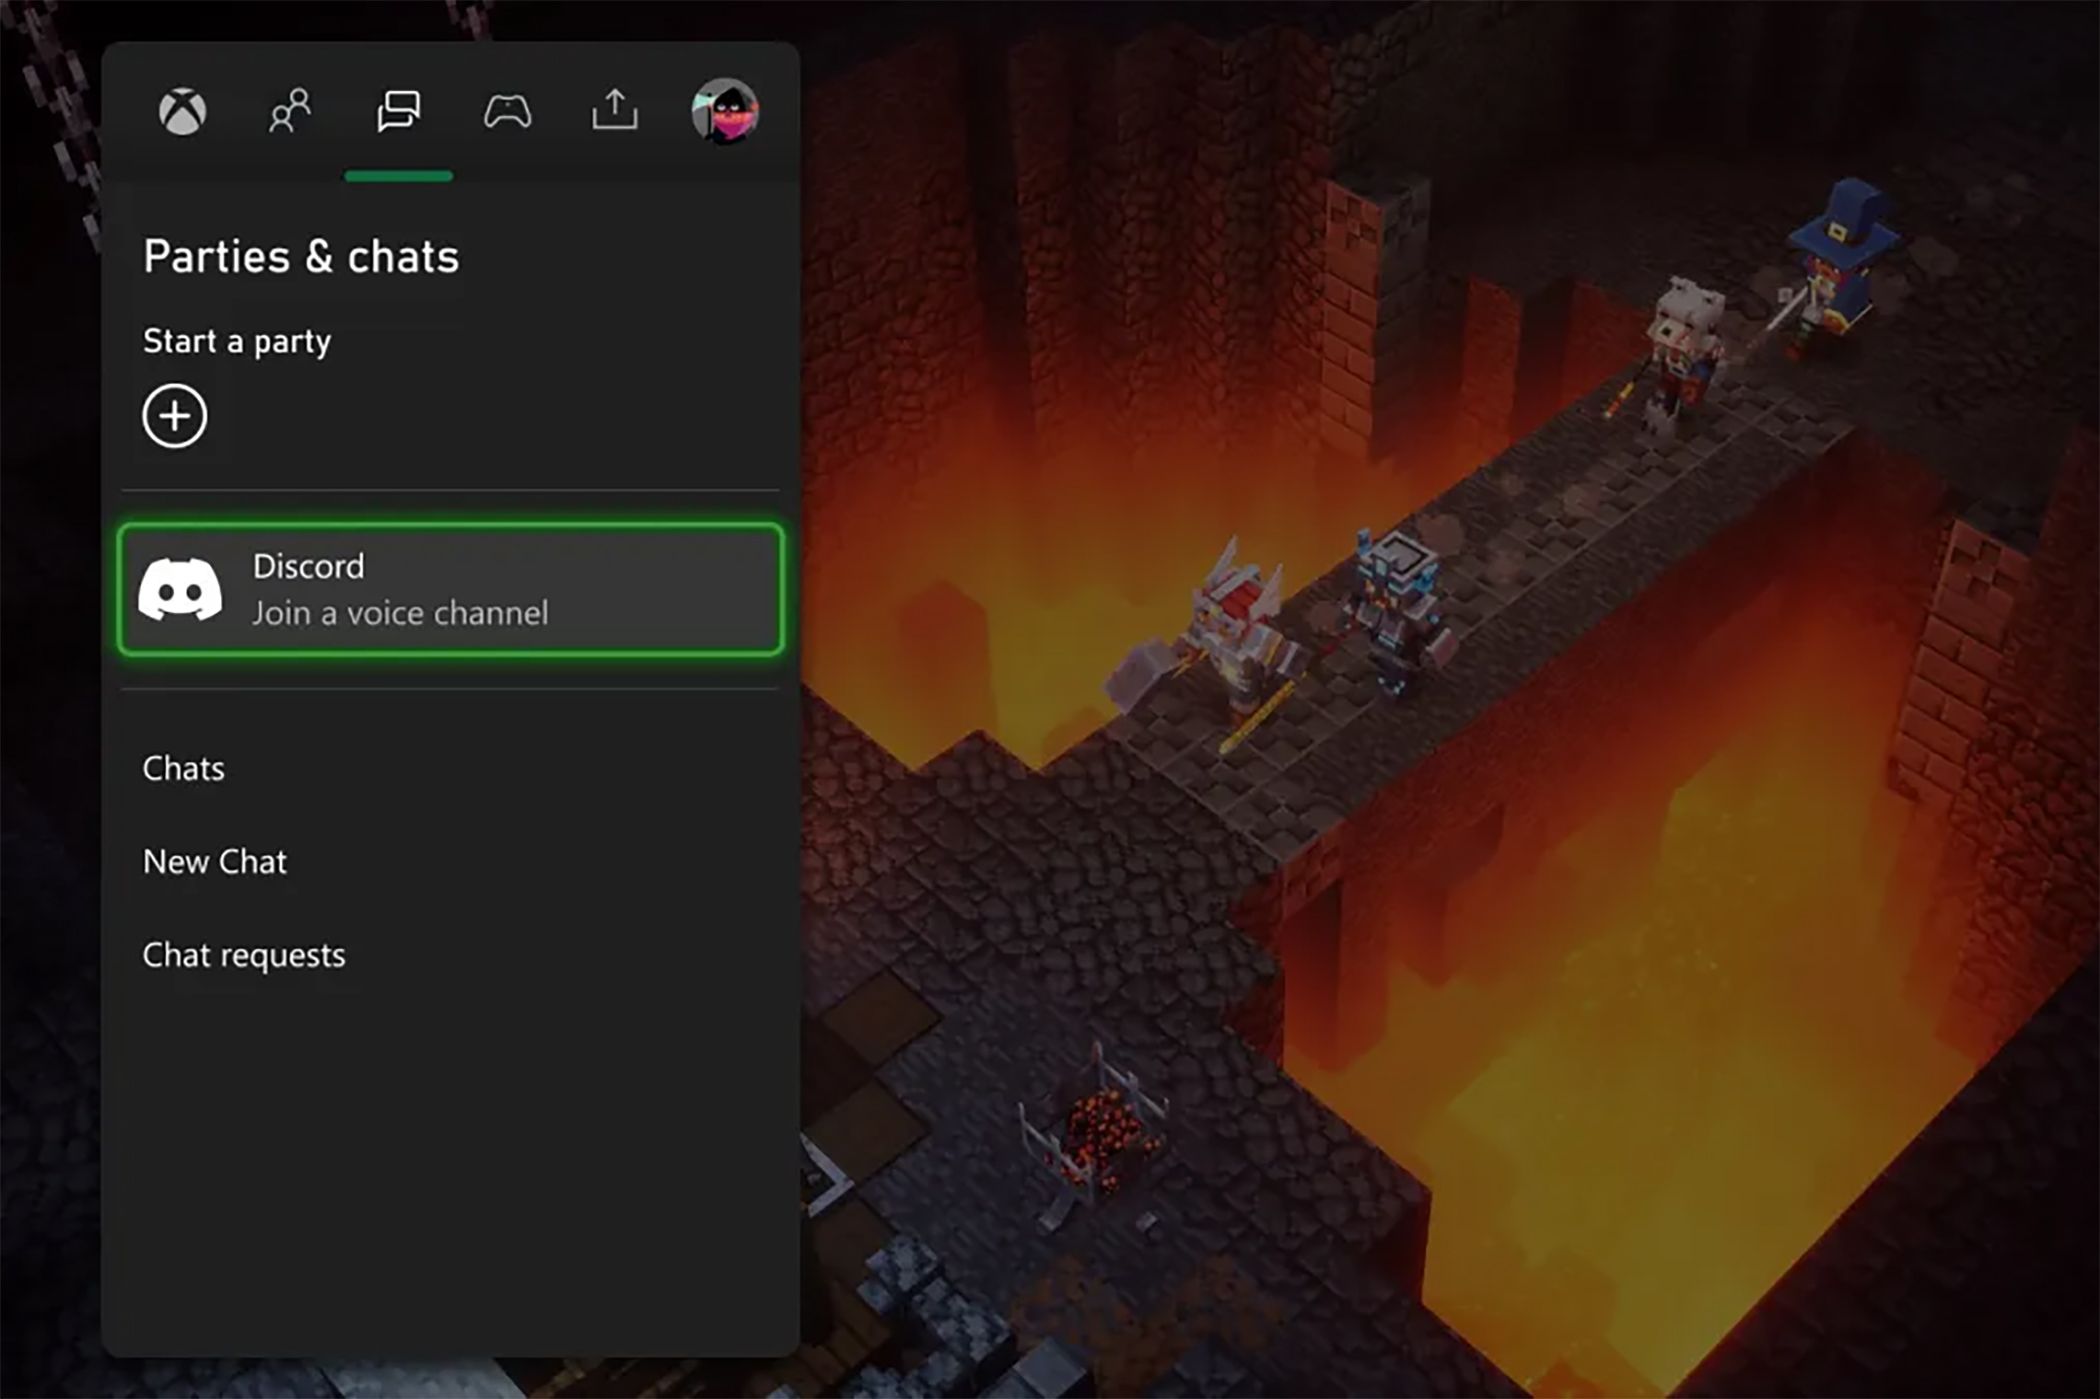 Screenshot of the Xbox menu with the option to join Discord audio channels highlighted.